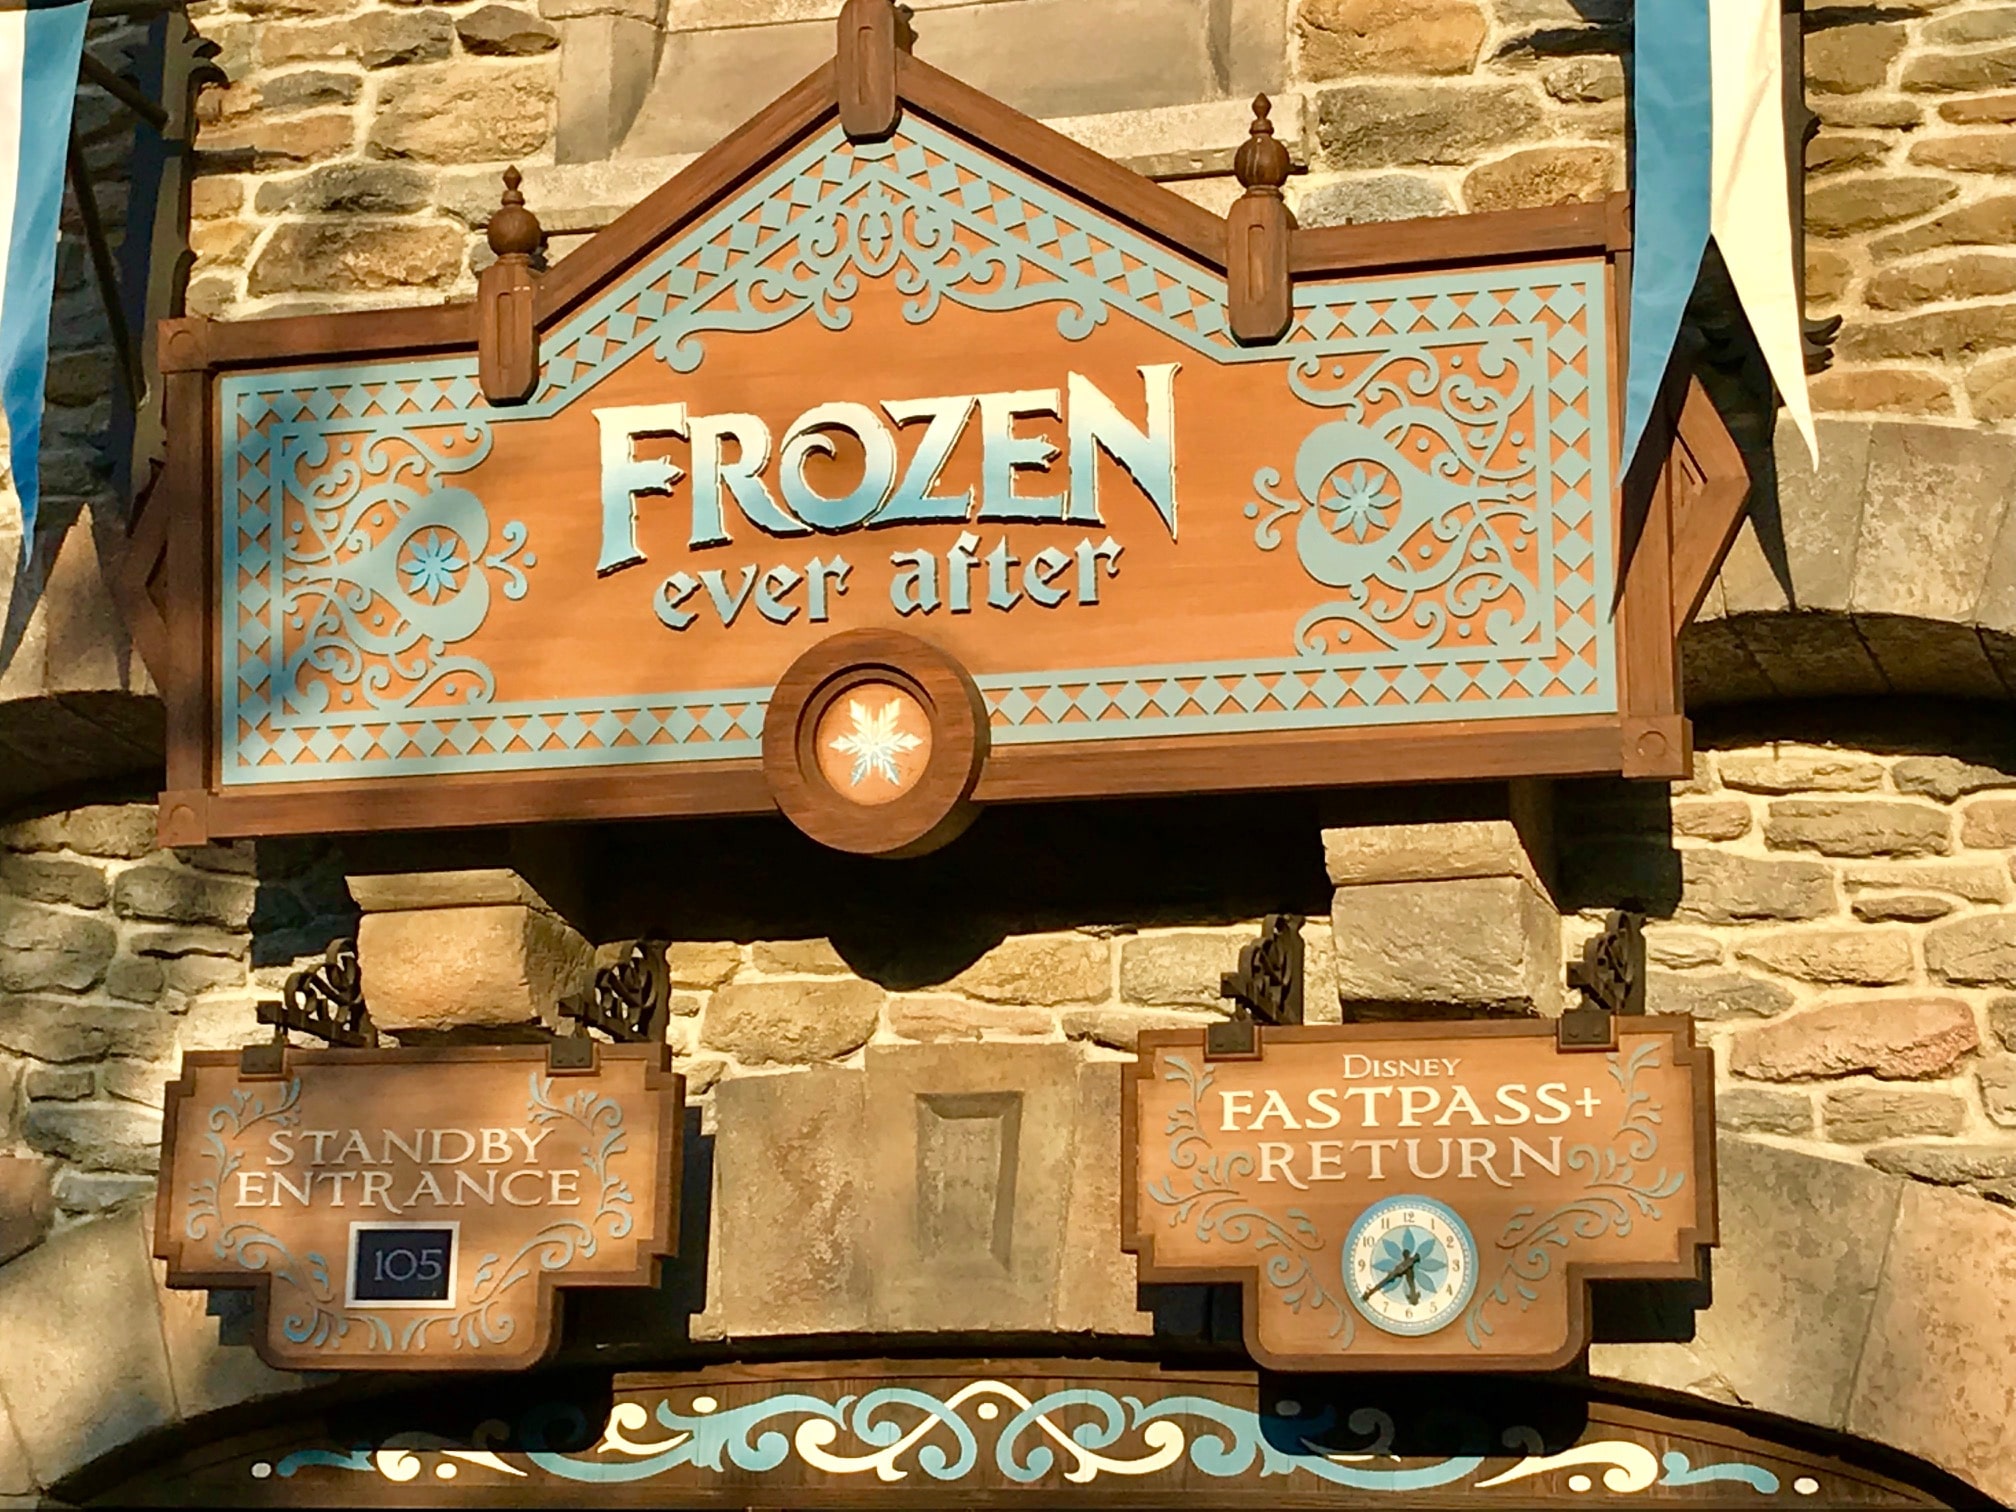 Frozen Ever After in Epcot with a 105 minute wait